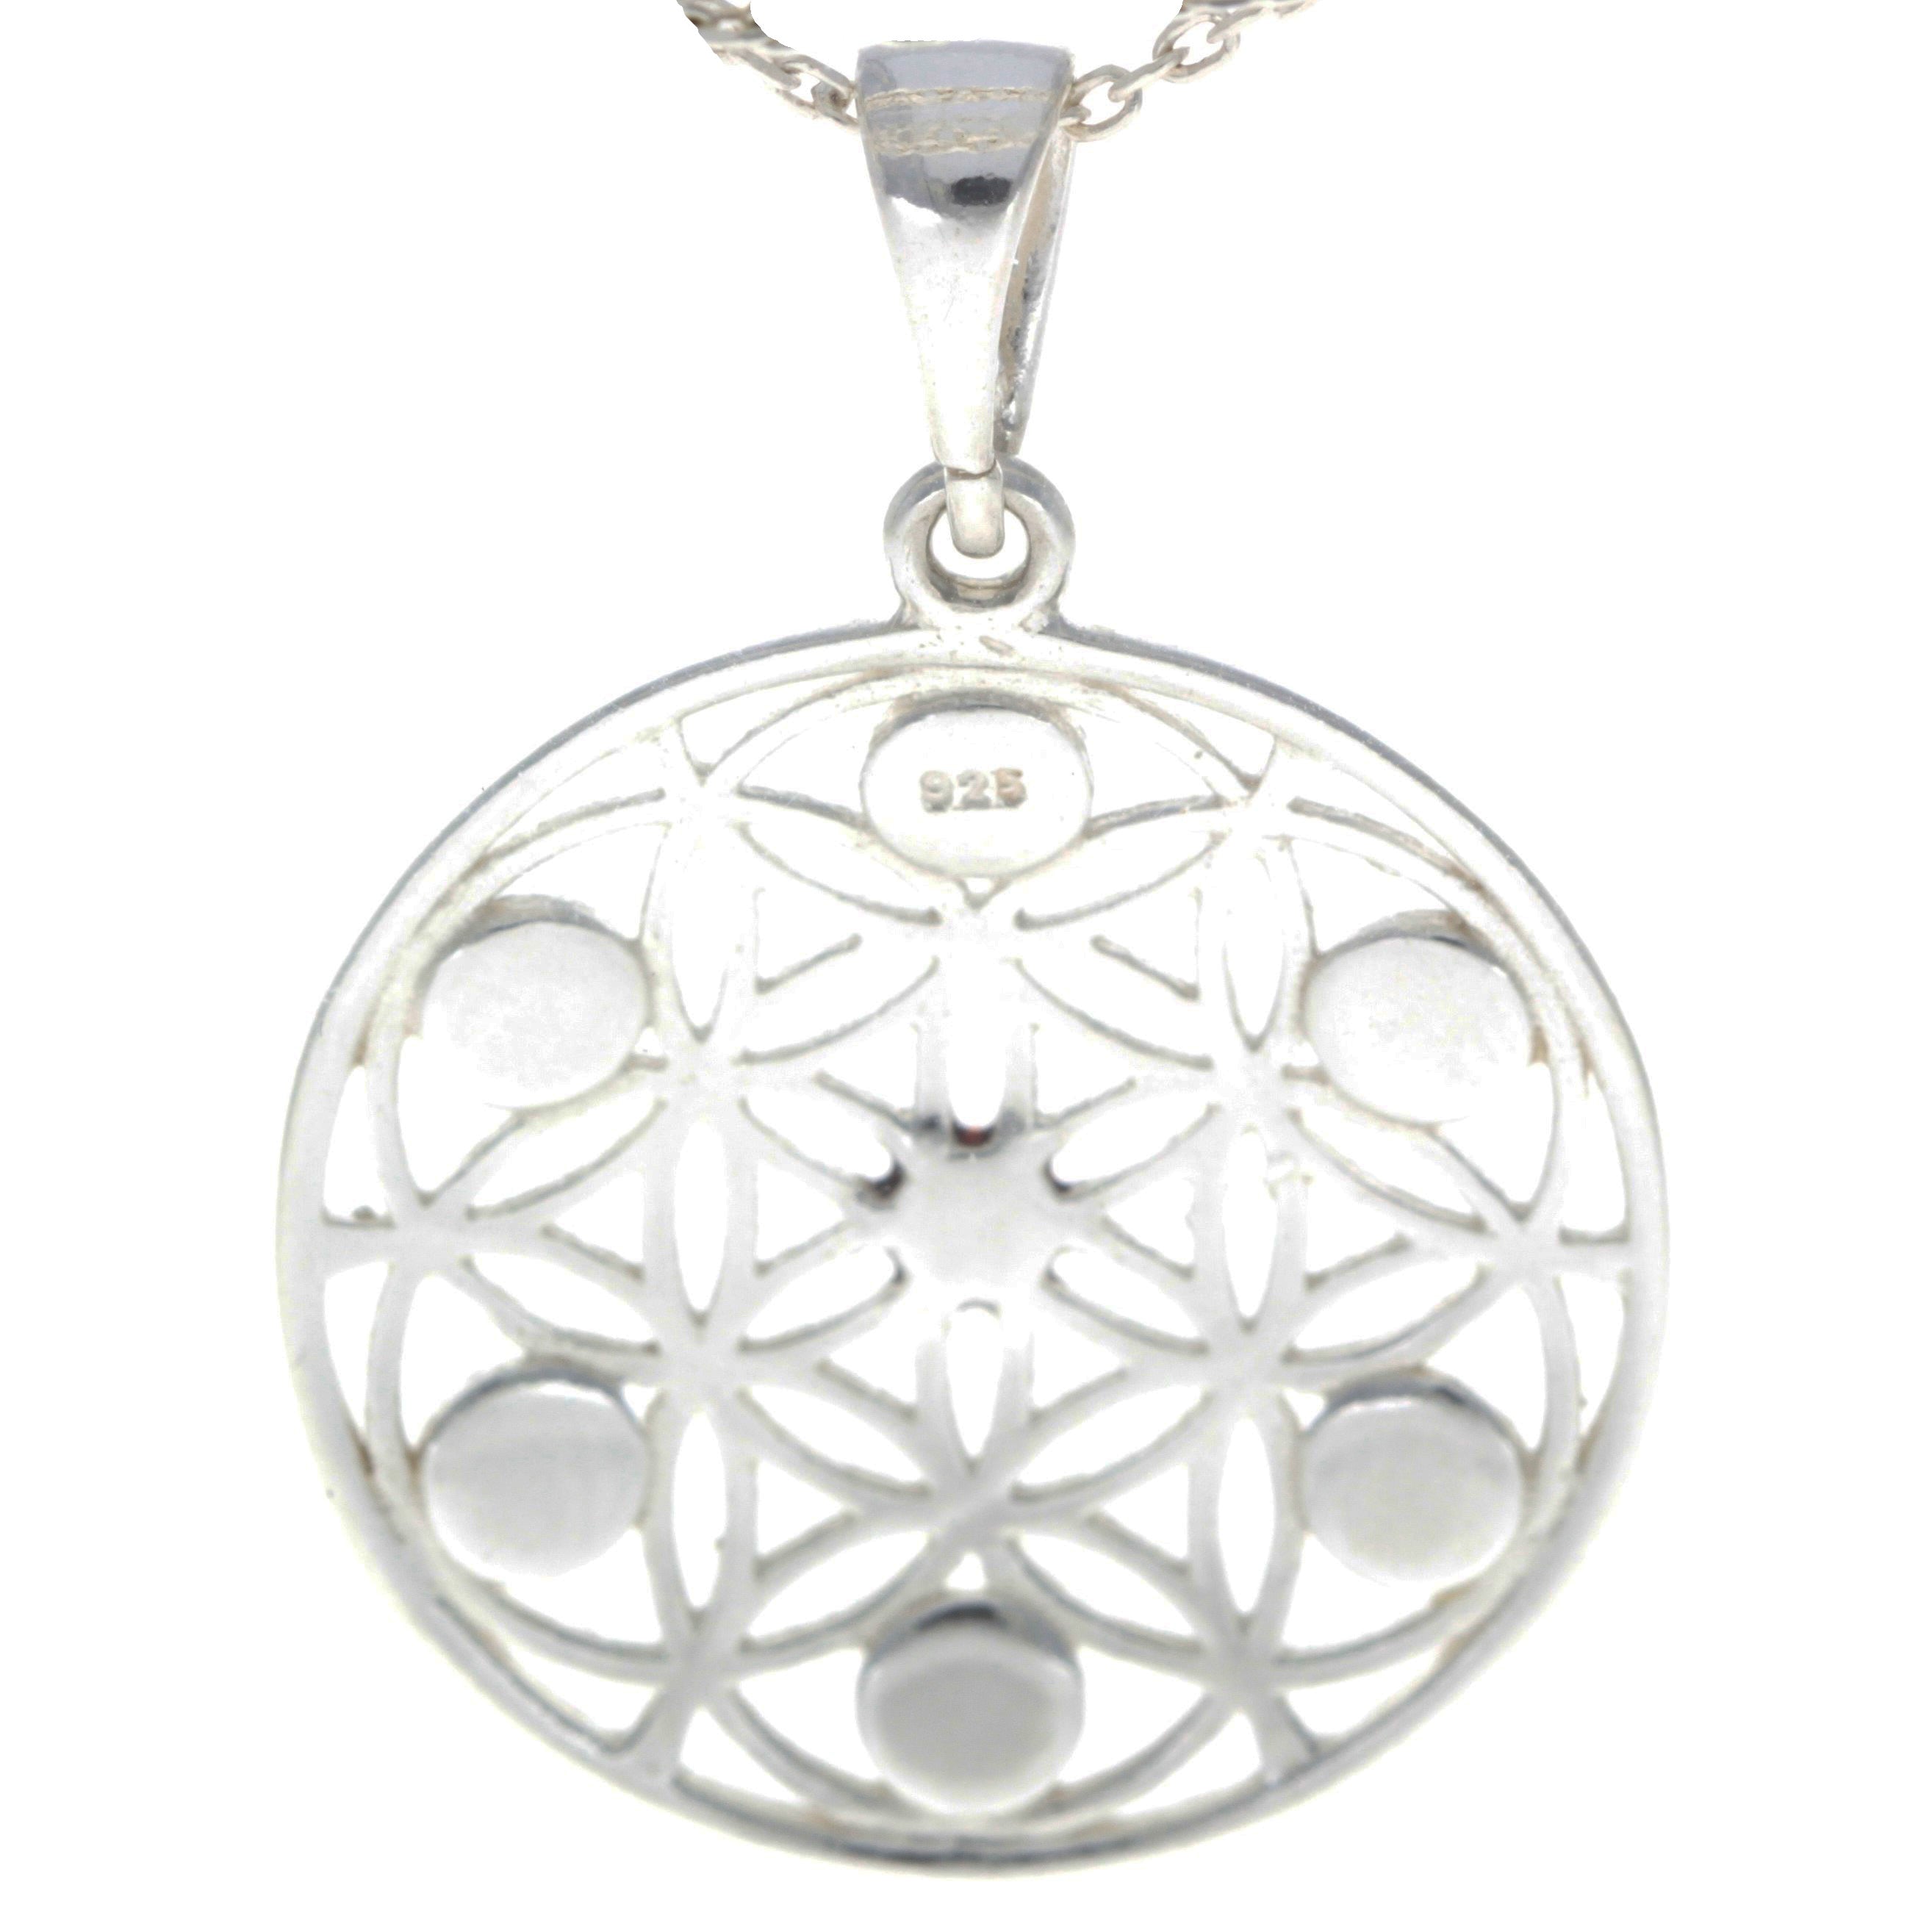 925 Sterling Silver Flower of Life Pendant set with Genuine Baltic Amber Gemstones - GL365